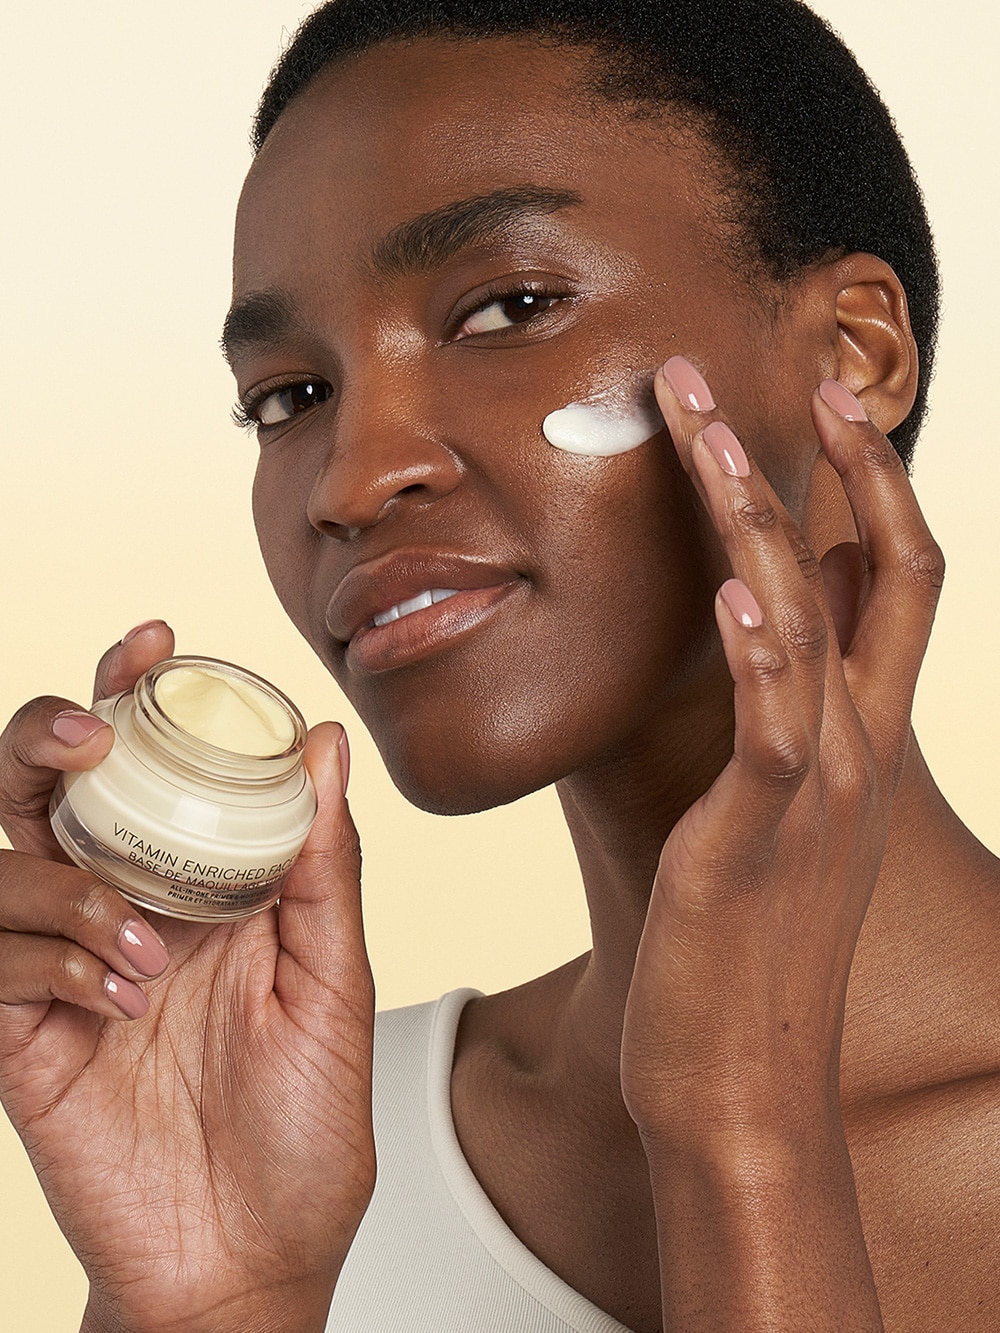 Model applying Vitamin Enriched Face Base to skin, focusing on the texture of the cream